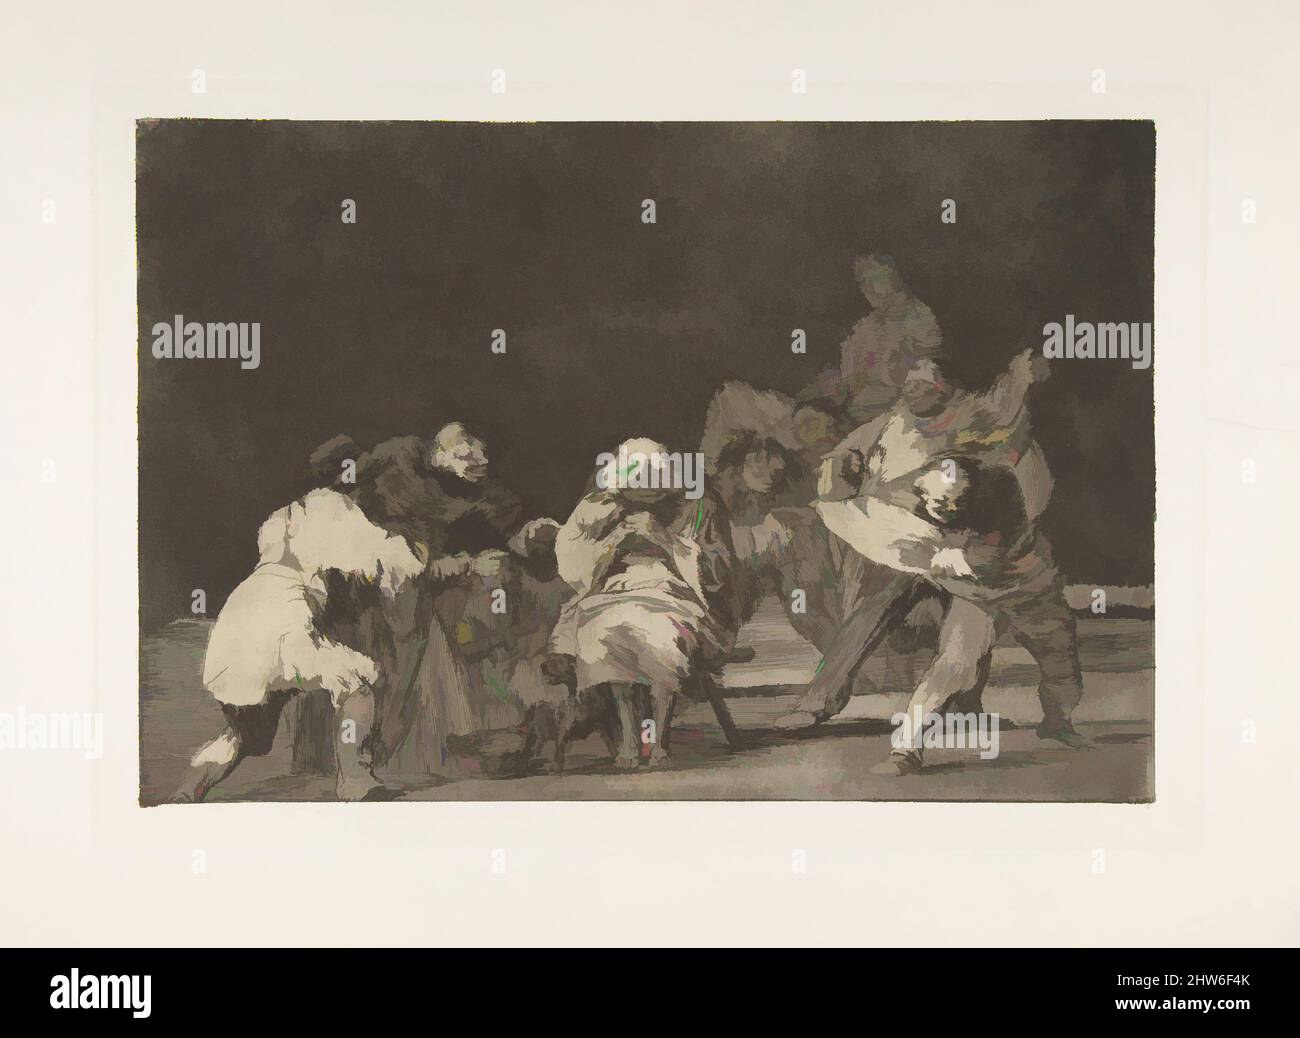 Art inspired by Plate 17 from the 'Disparates': Loyalty, ca. 1816–23 (published 1864), Etching and burnished aquatint, Plate: 9 5/8 × 13 13/16 in. (24.5 × 35.1 cm), Prints, Goya (Francisco de Goya y Lucientes) (Spanish, Fuendetodos 1746–1828 Bordeaux), From the posthumous first edition, Classic works modernized by Artotop with a splash of modernity. Shapes, color and value, eye-catching visual impact on art. Emotions through freedom of artworks in a contemporary way. A timeless message pursuing a wildly creative new direction. Artists turning to the digital medium and creating the Artotop NFT Stock Photo